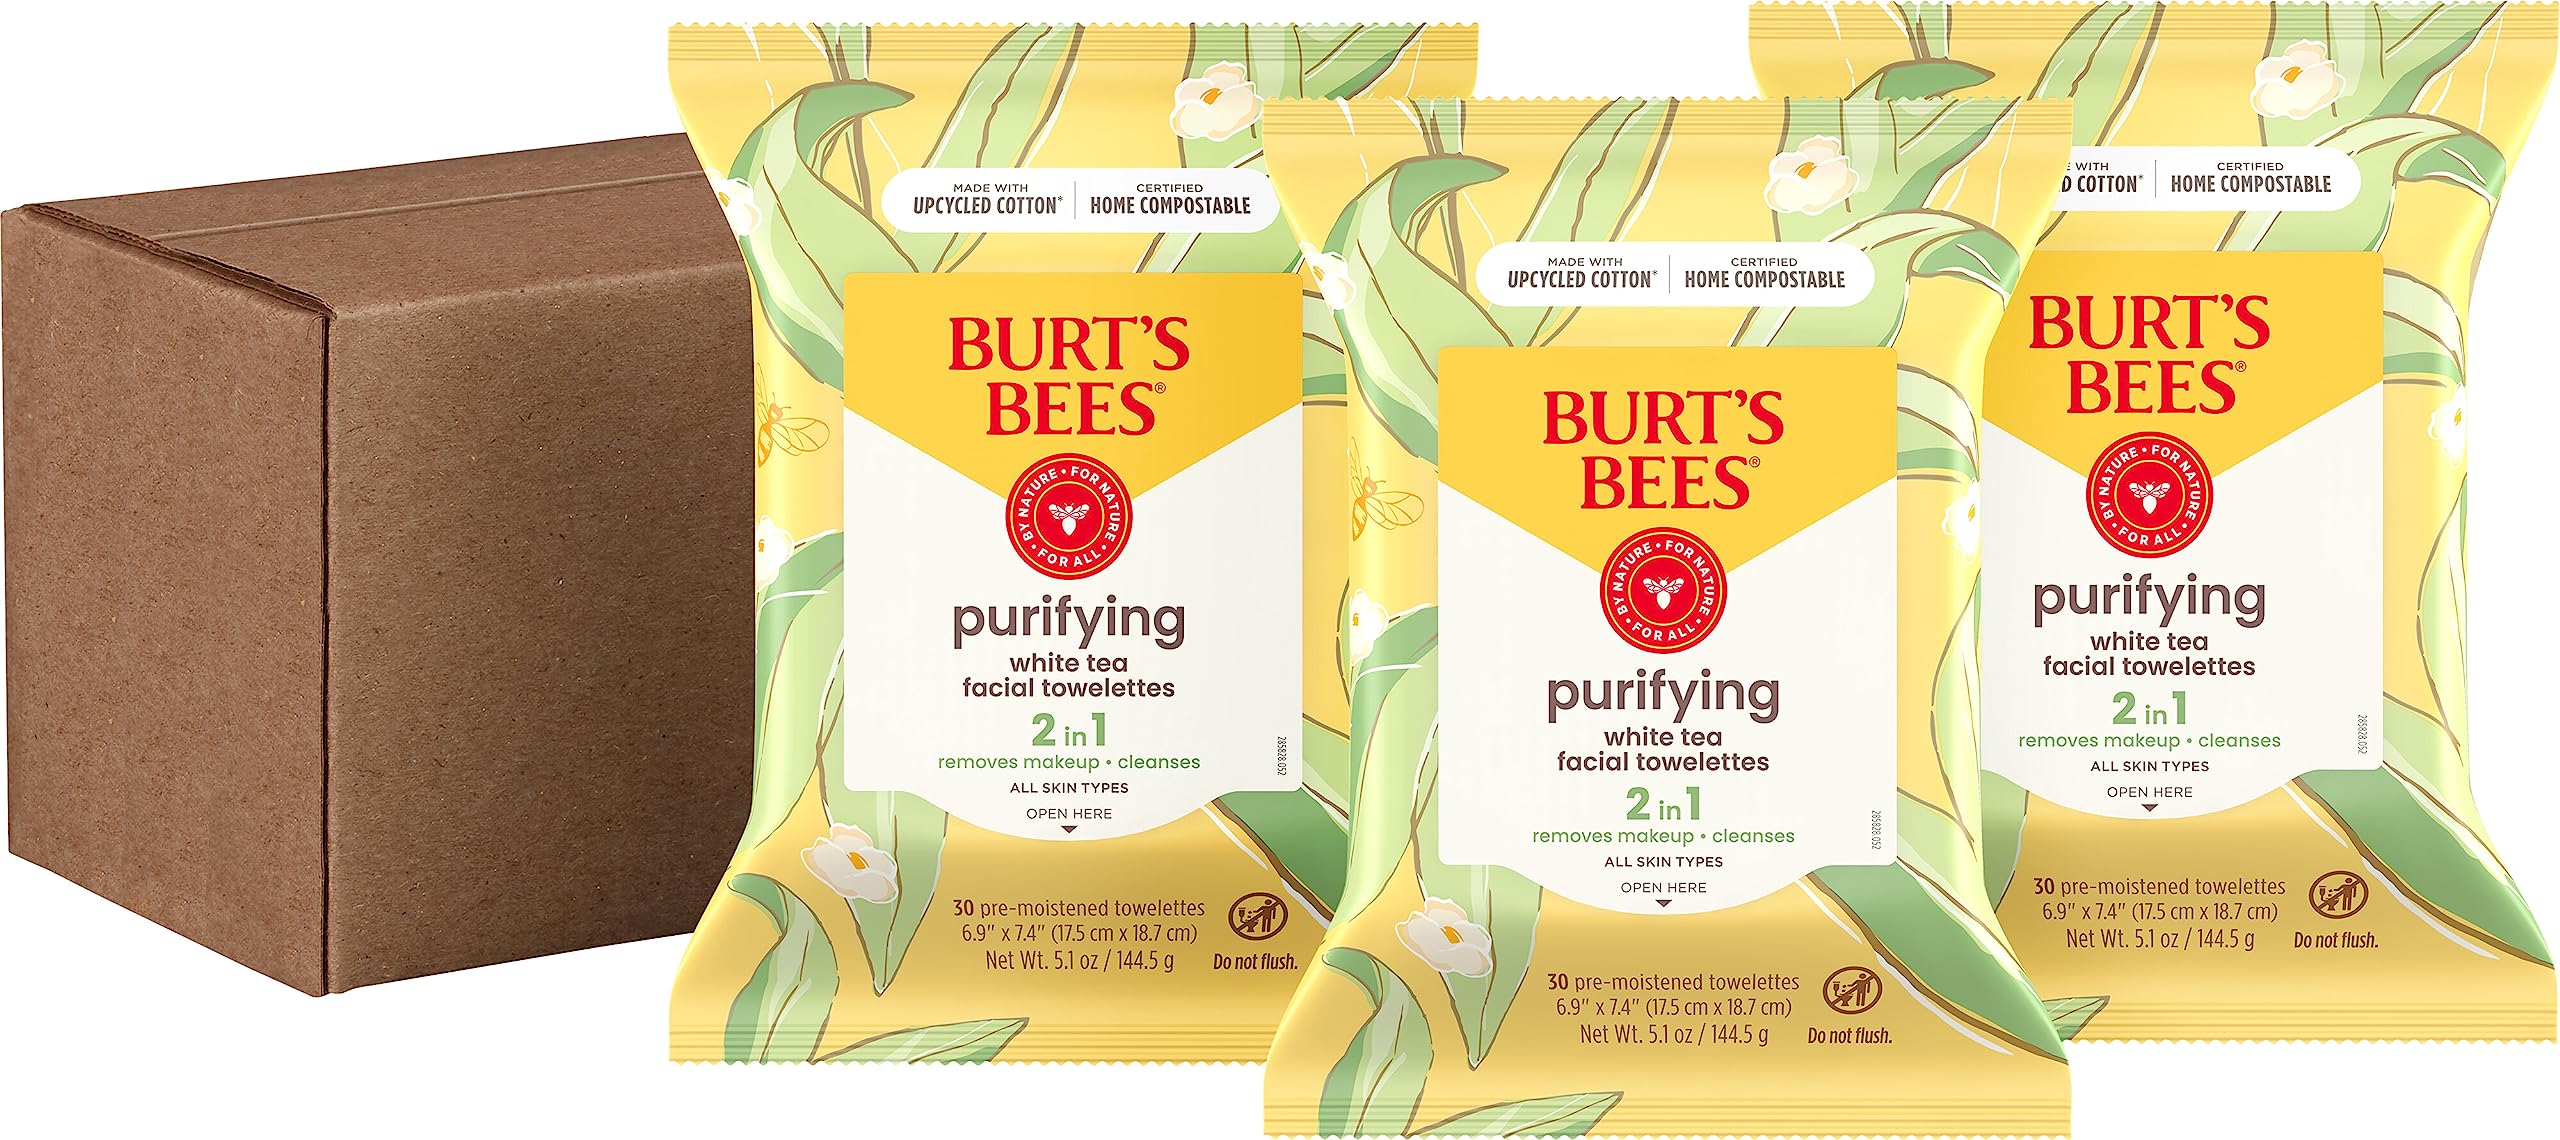 Burt's Bees Face Wipes, Makeup Remover Facial Cleansing Towelettes for All Skin Types, Hydrating with White Tea Extract, 30 Count (Pack of 3)